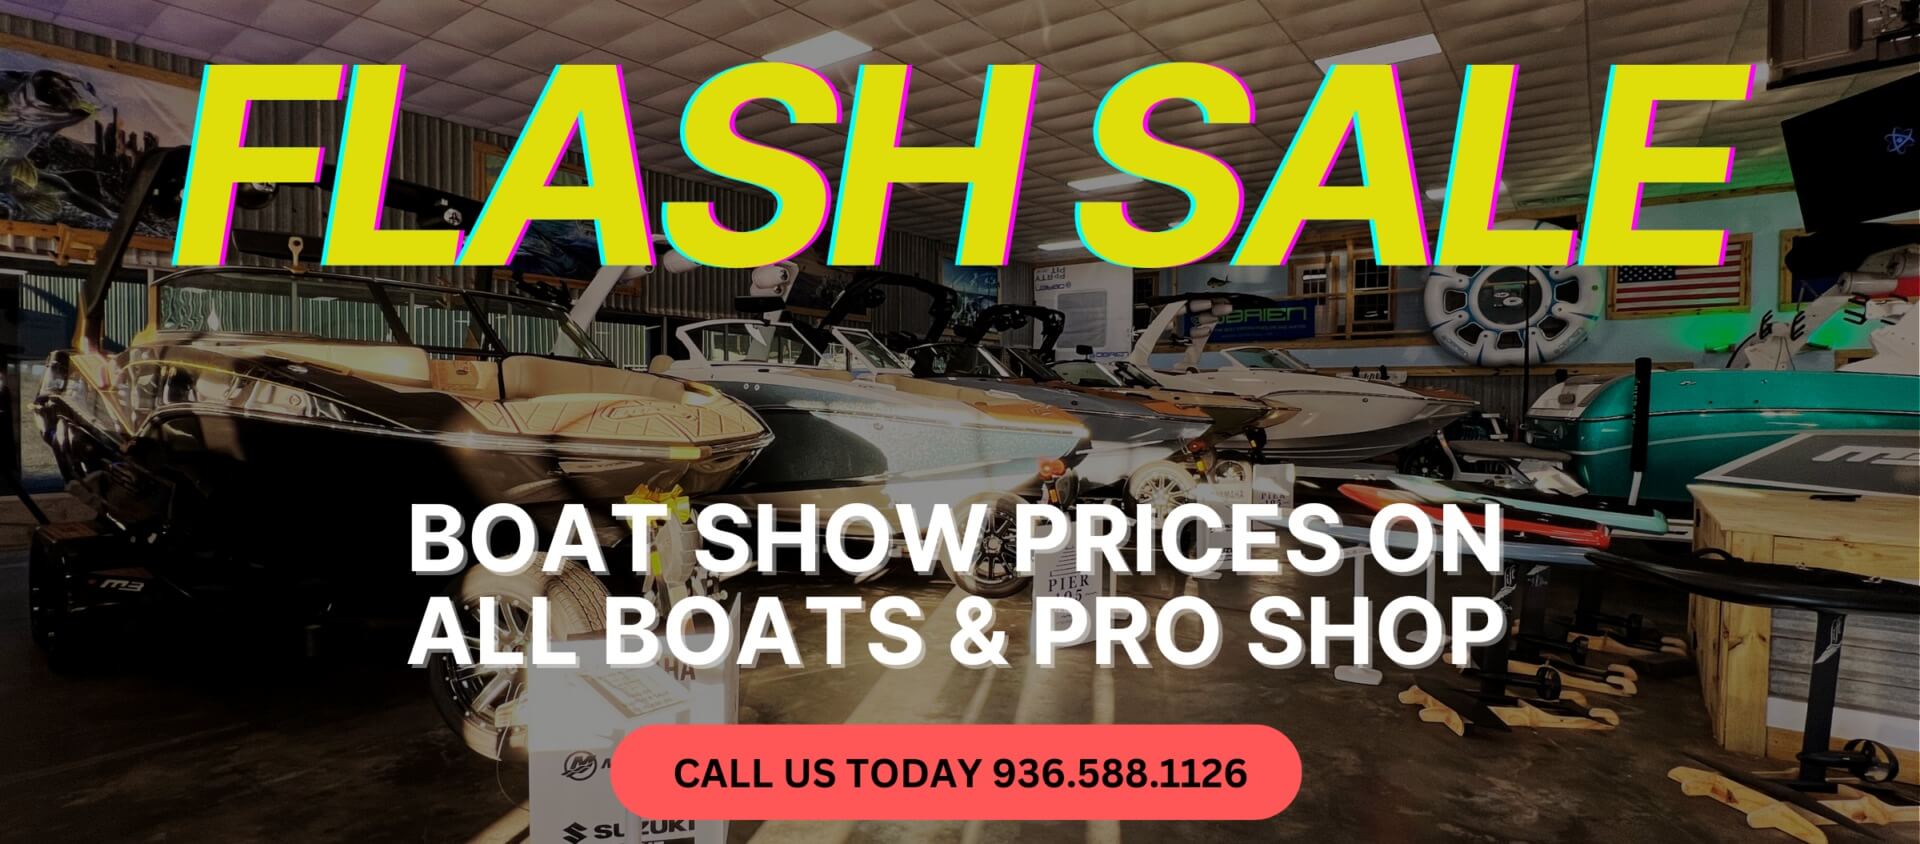 Pier 105 Marina Boats and Pro Shop sale